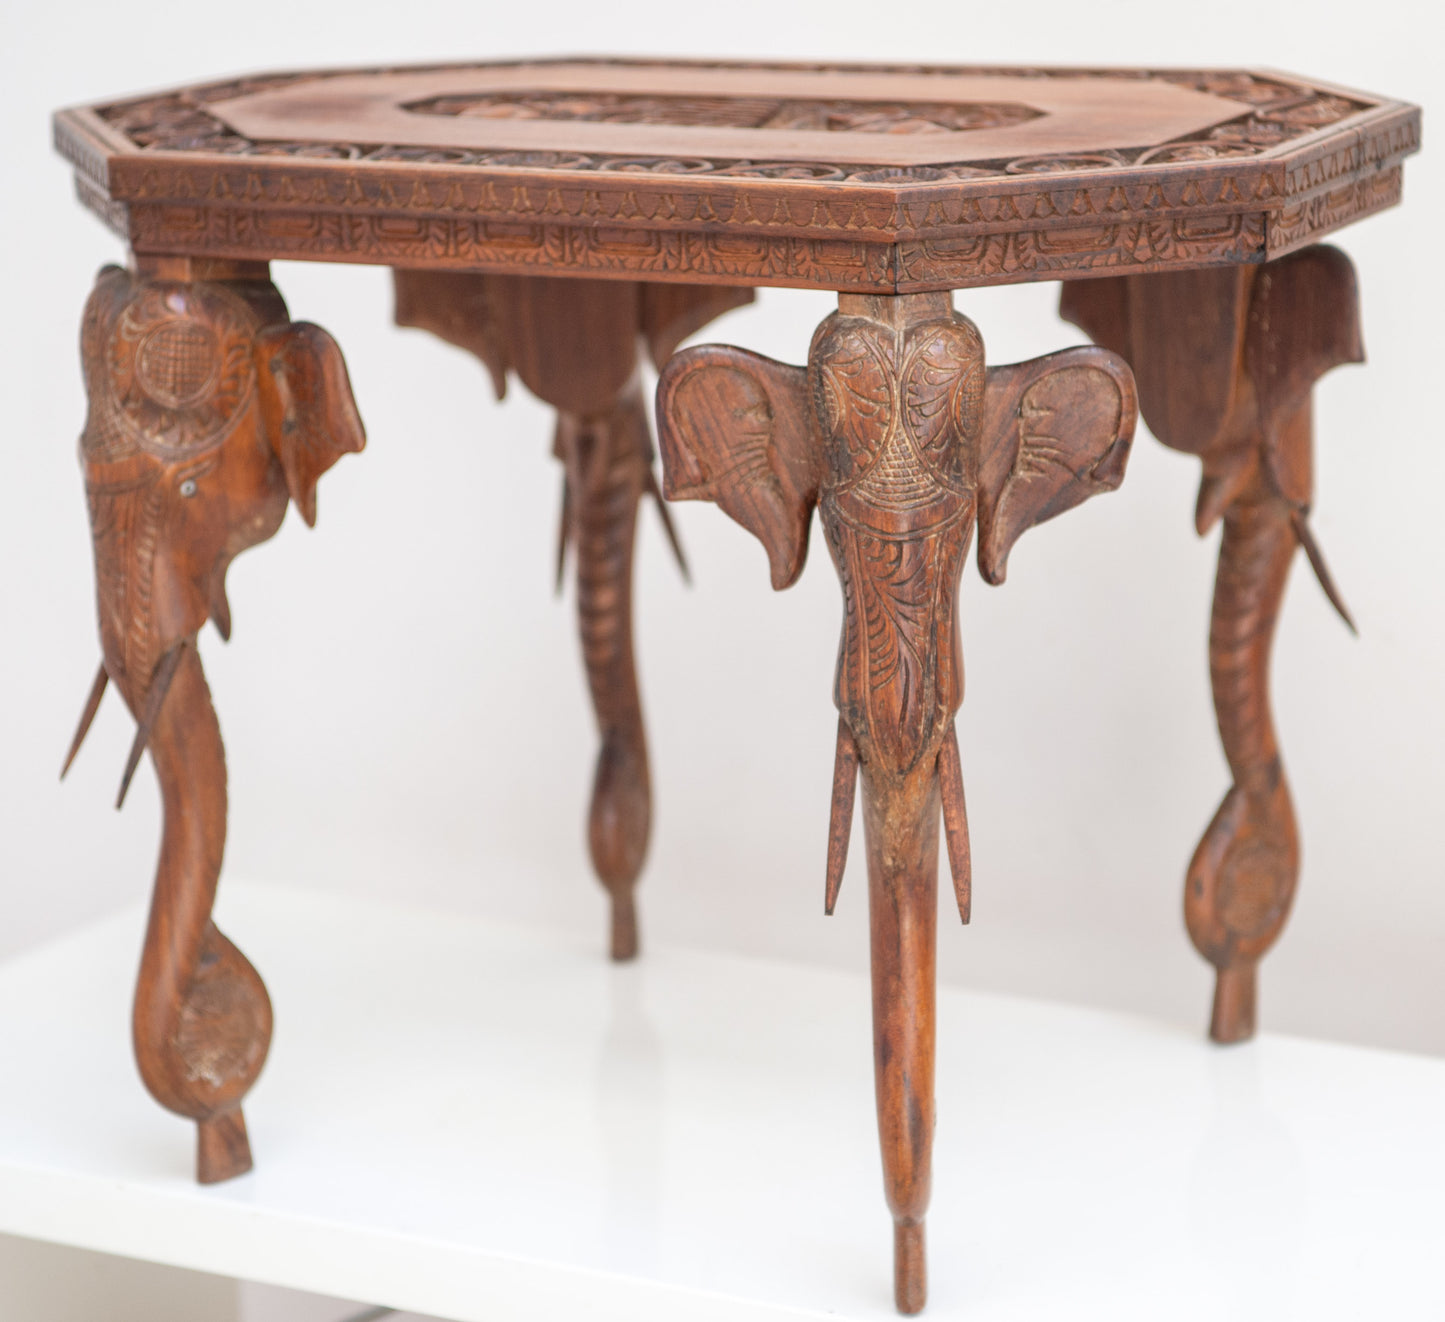 LOVELY SMALL CIRCA 1920 ANGLO INDIAN ELEPHANT HAND CARVED ROSEWOOD SIDE TABLE